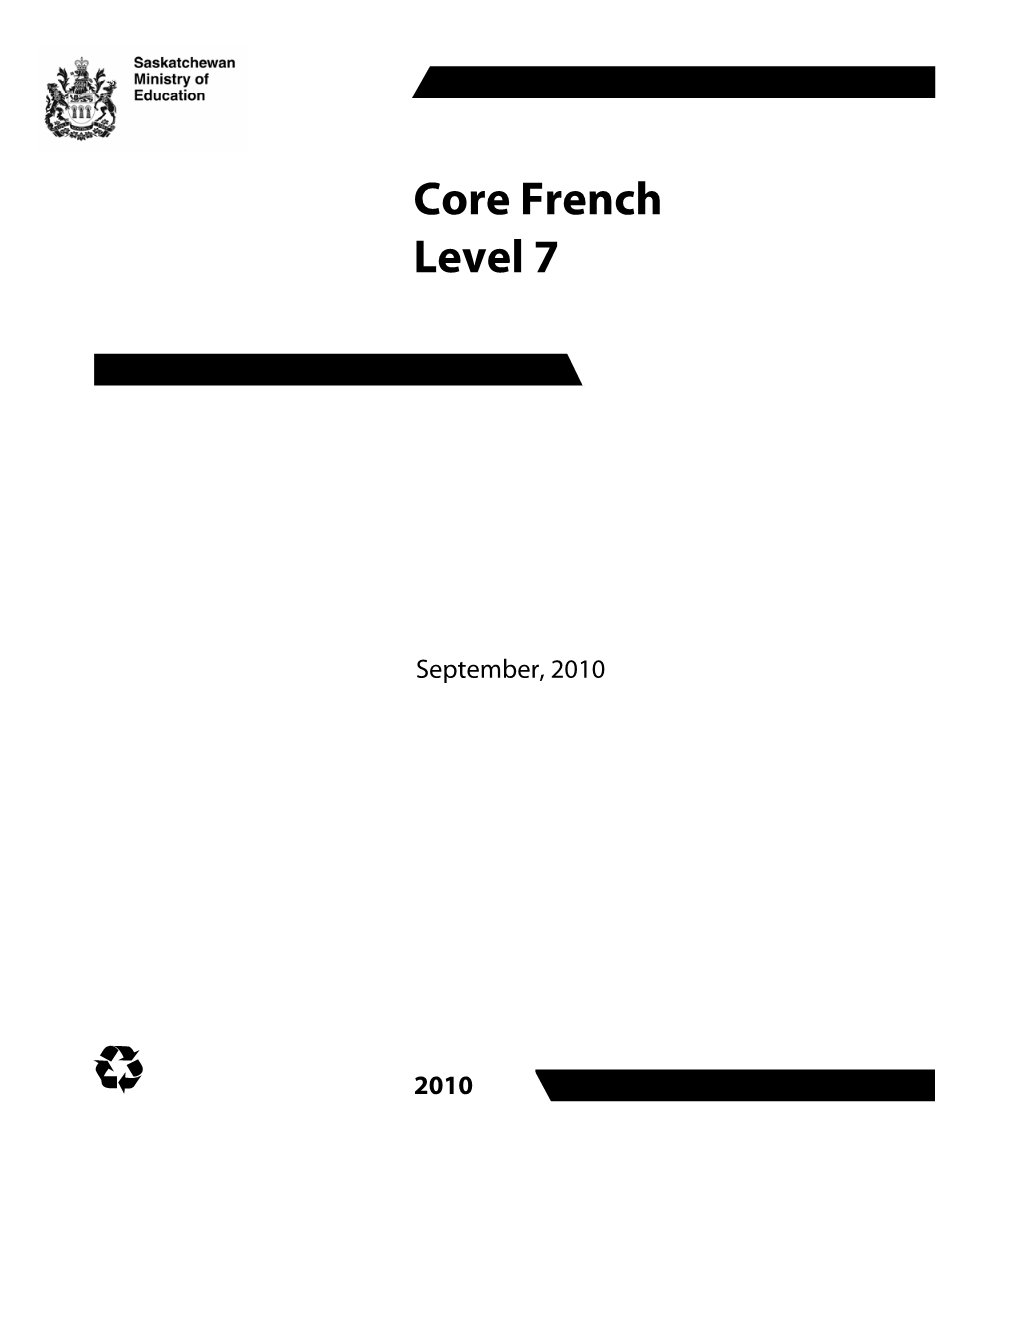 Core French Level 7